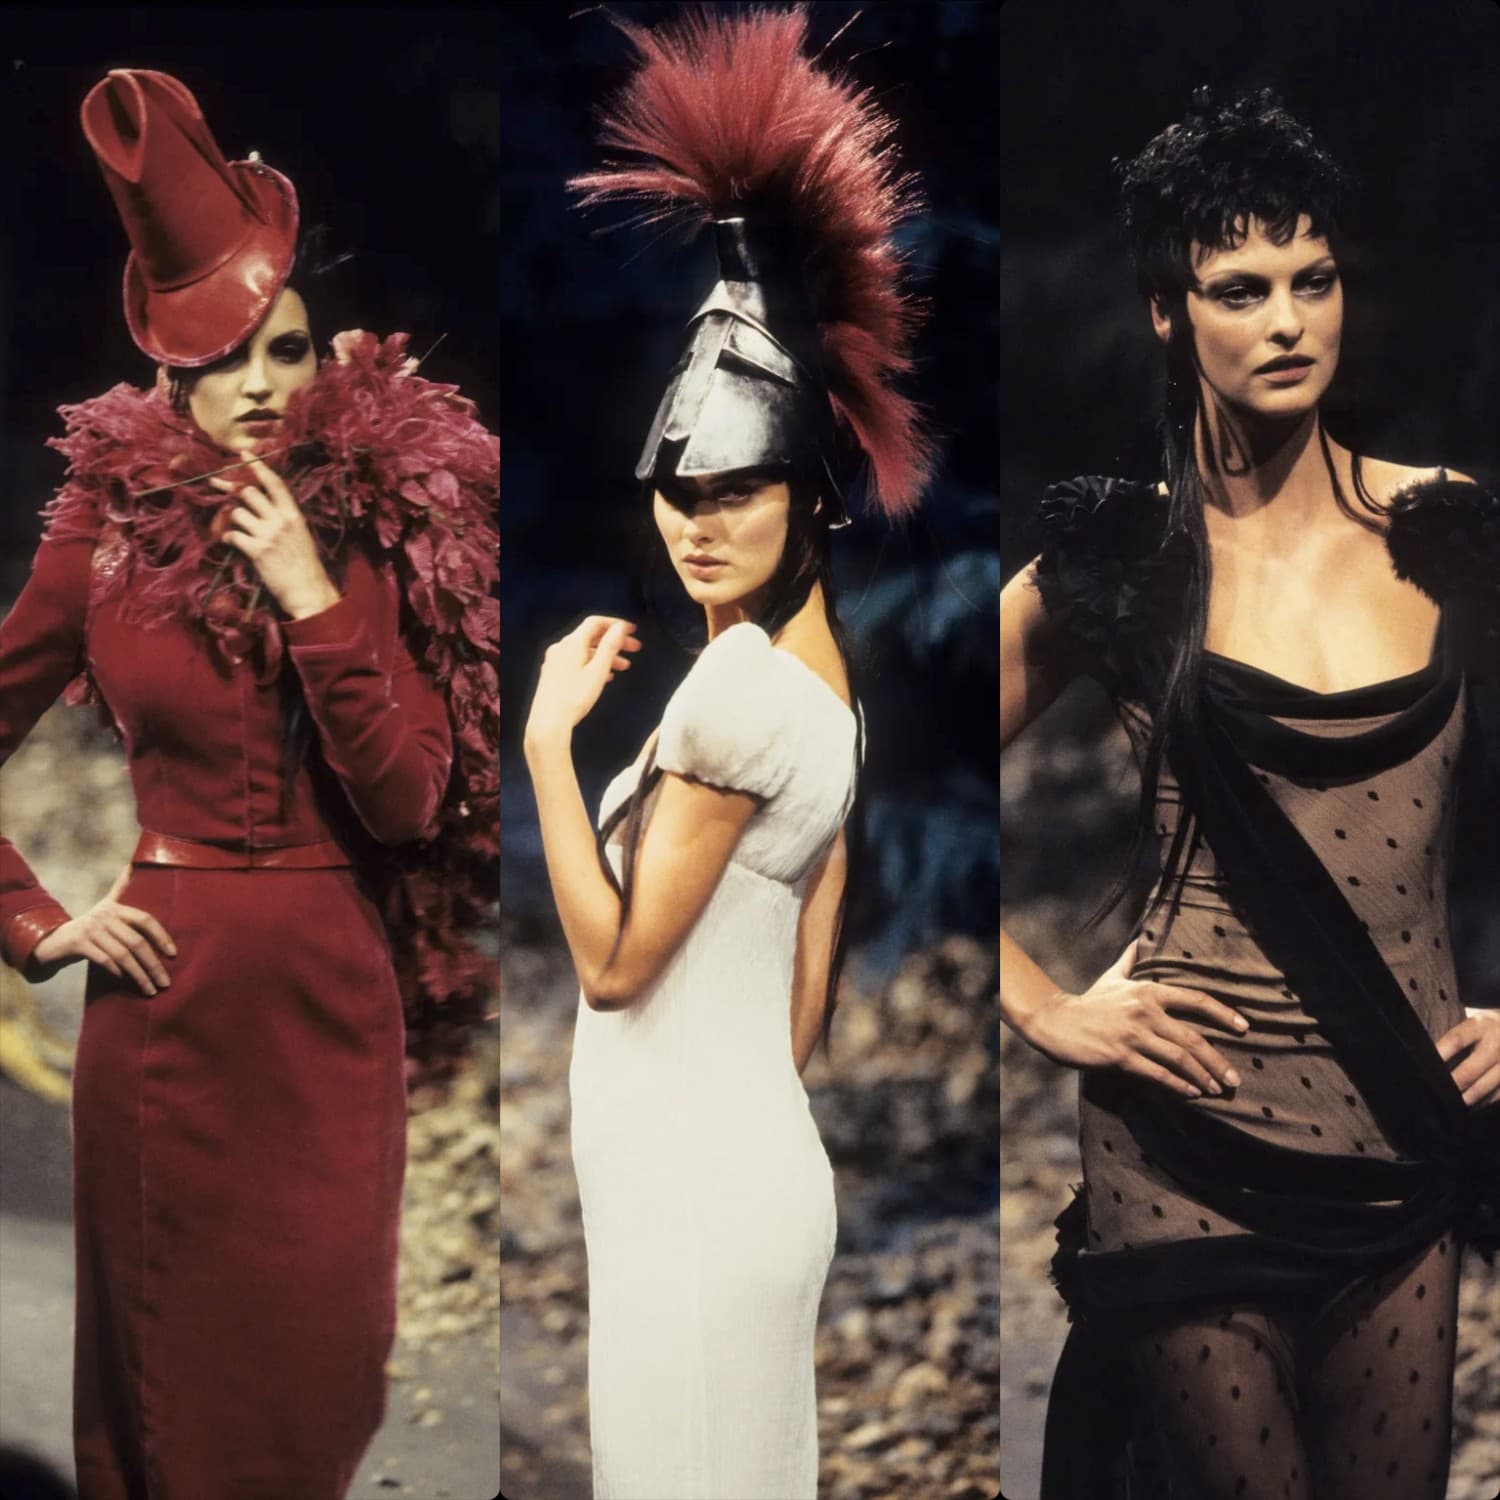 Givenchy by John Galliano Haute Couture Fall-Winter 1996-1997. RUNWAY MAGAZINE ® Collections. RUNWAY NOW / RUNWAY NEW